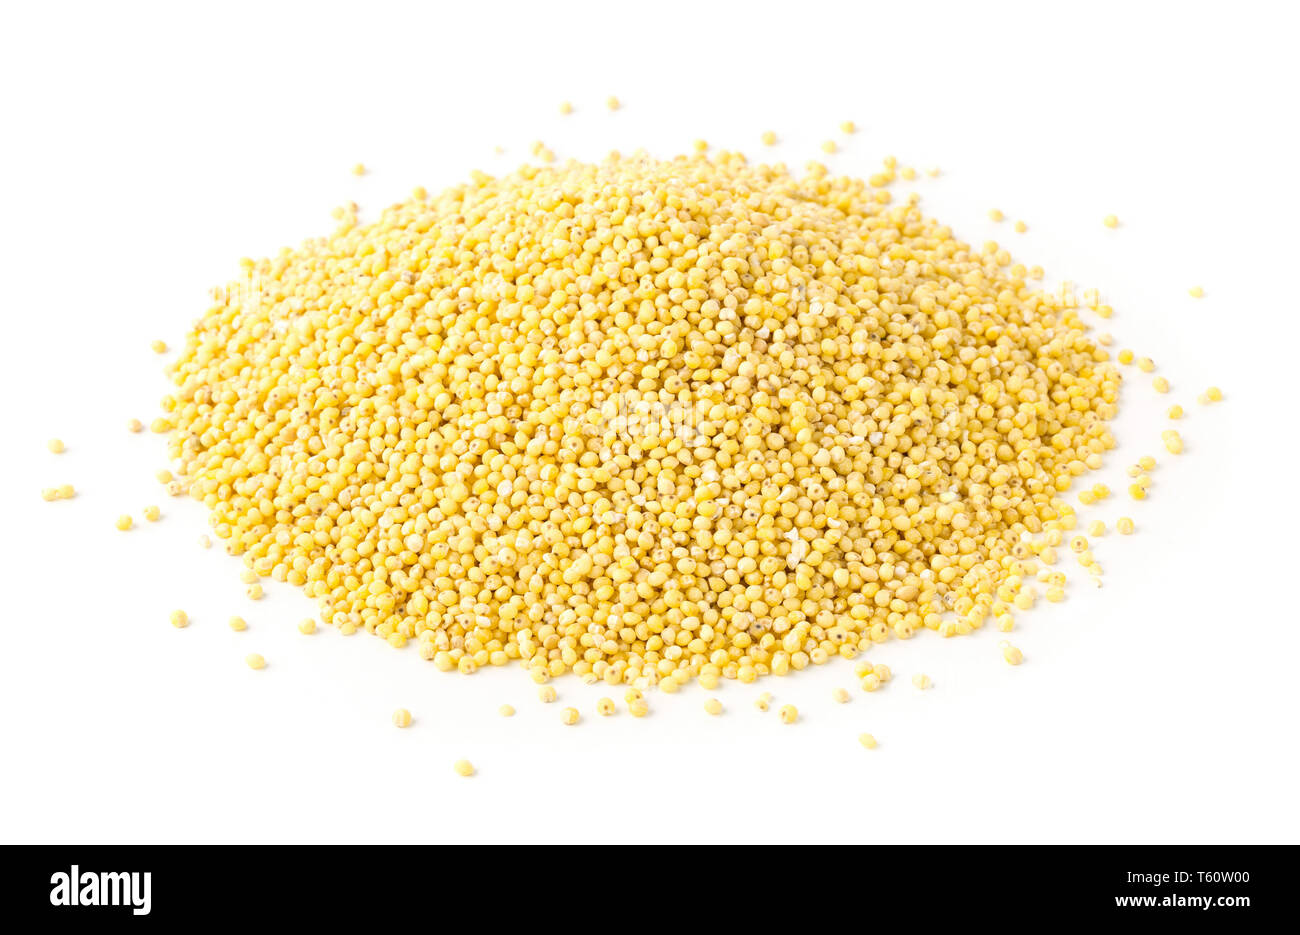 Pile of golden millet, a gluten free grain seed, over white background Stock Photo